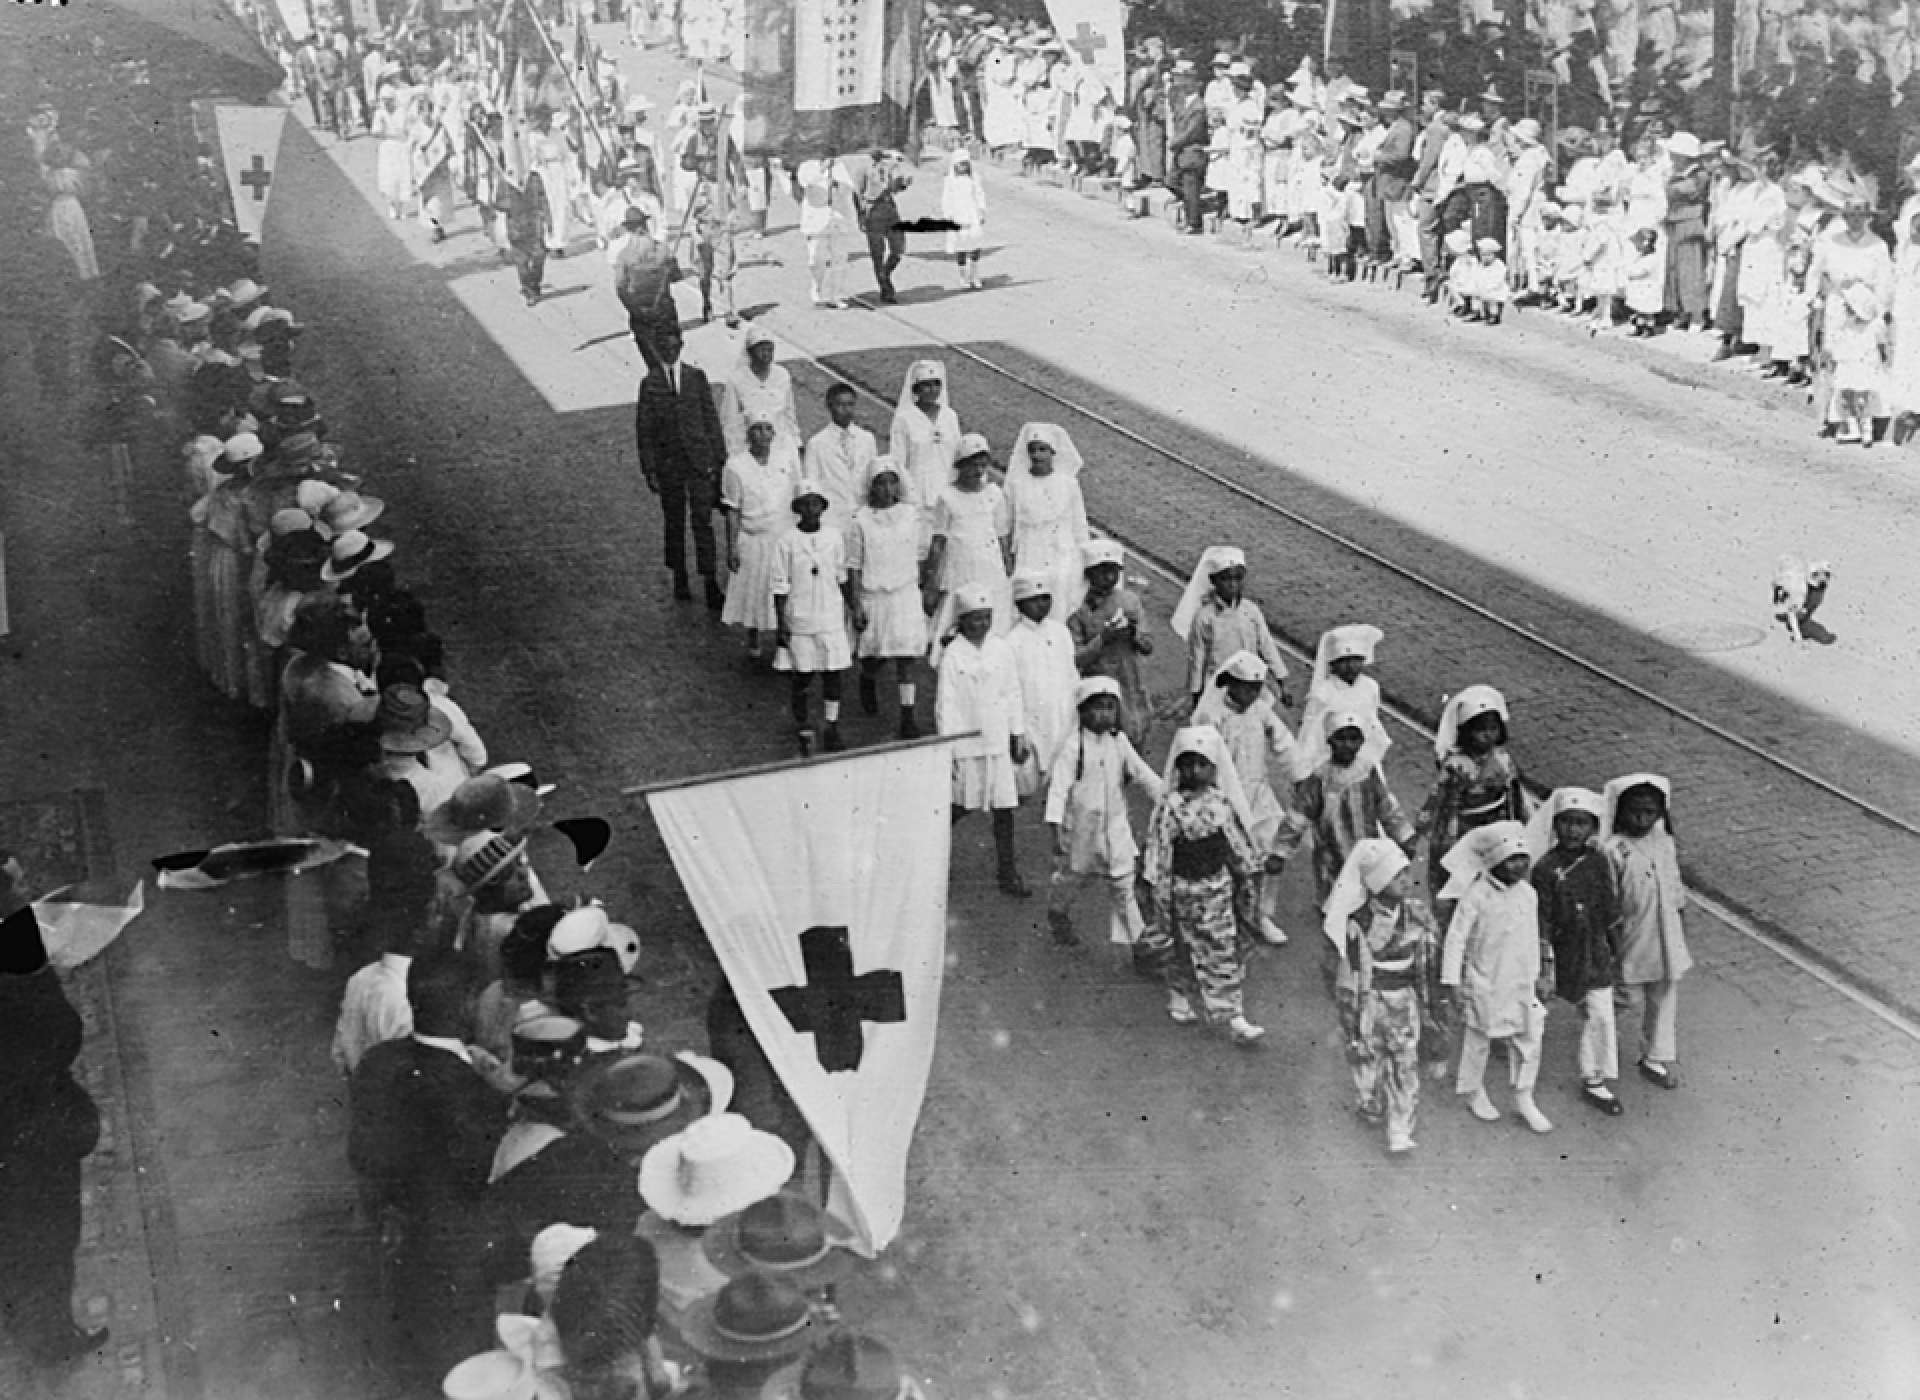 Chinese and Japanese children marching in a Junior Division American Red Cross Parade in Honolulu in 1918.